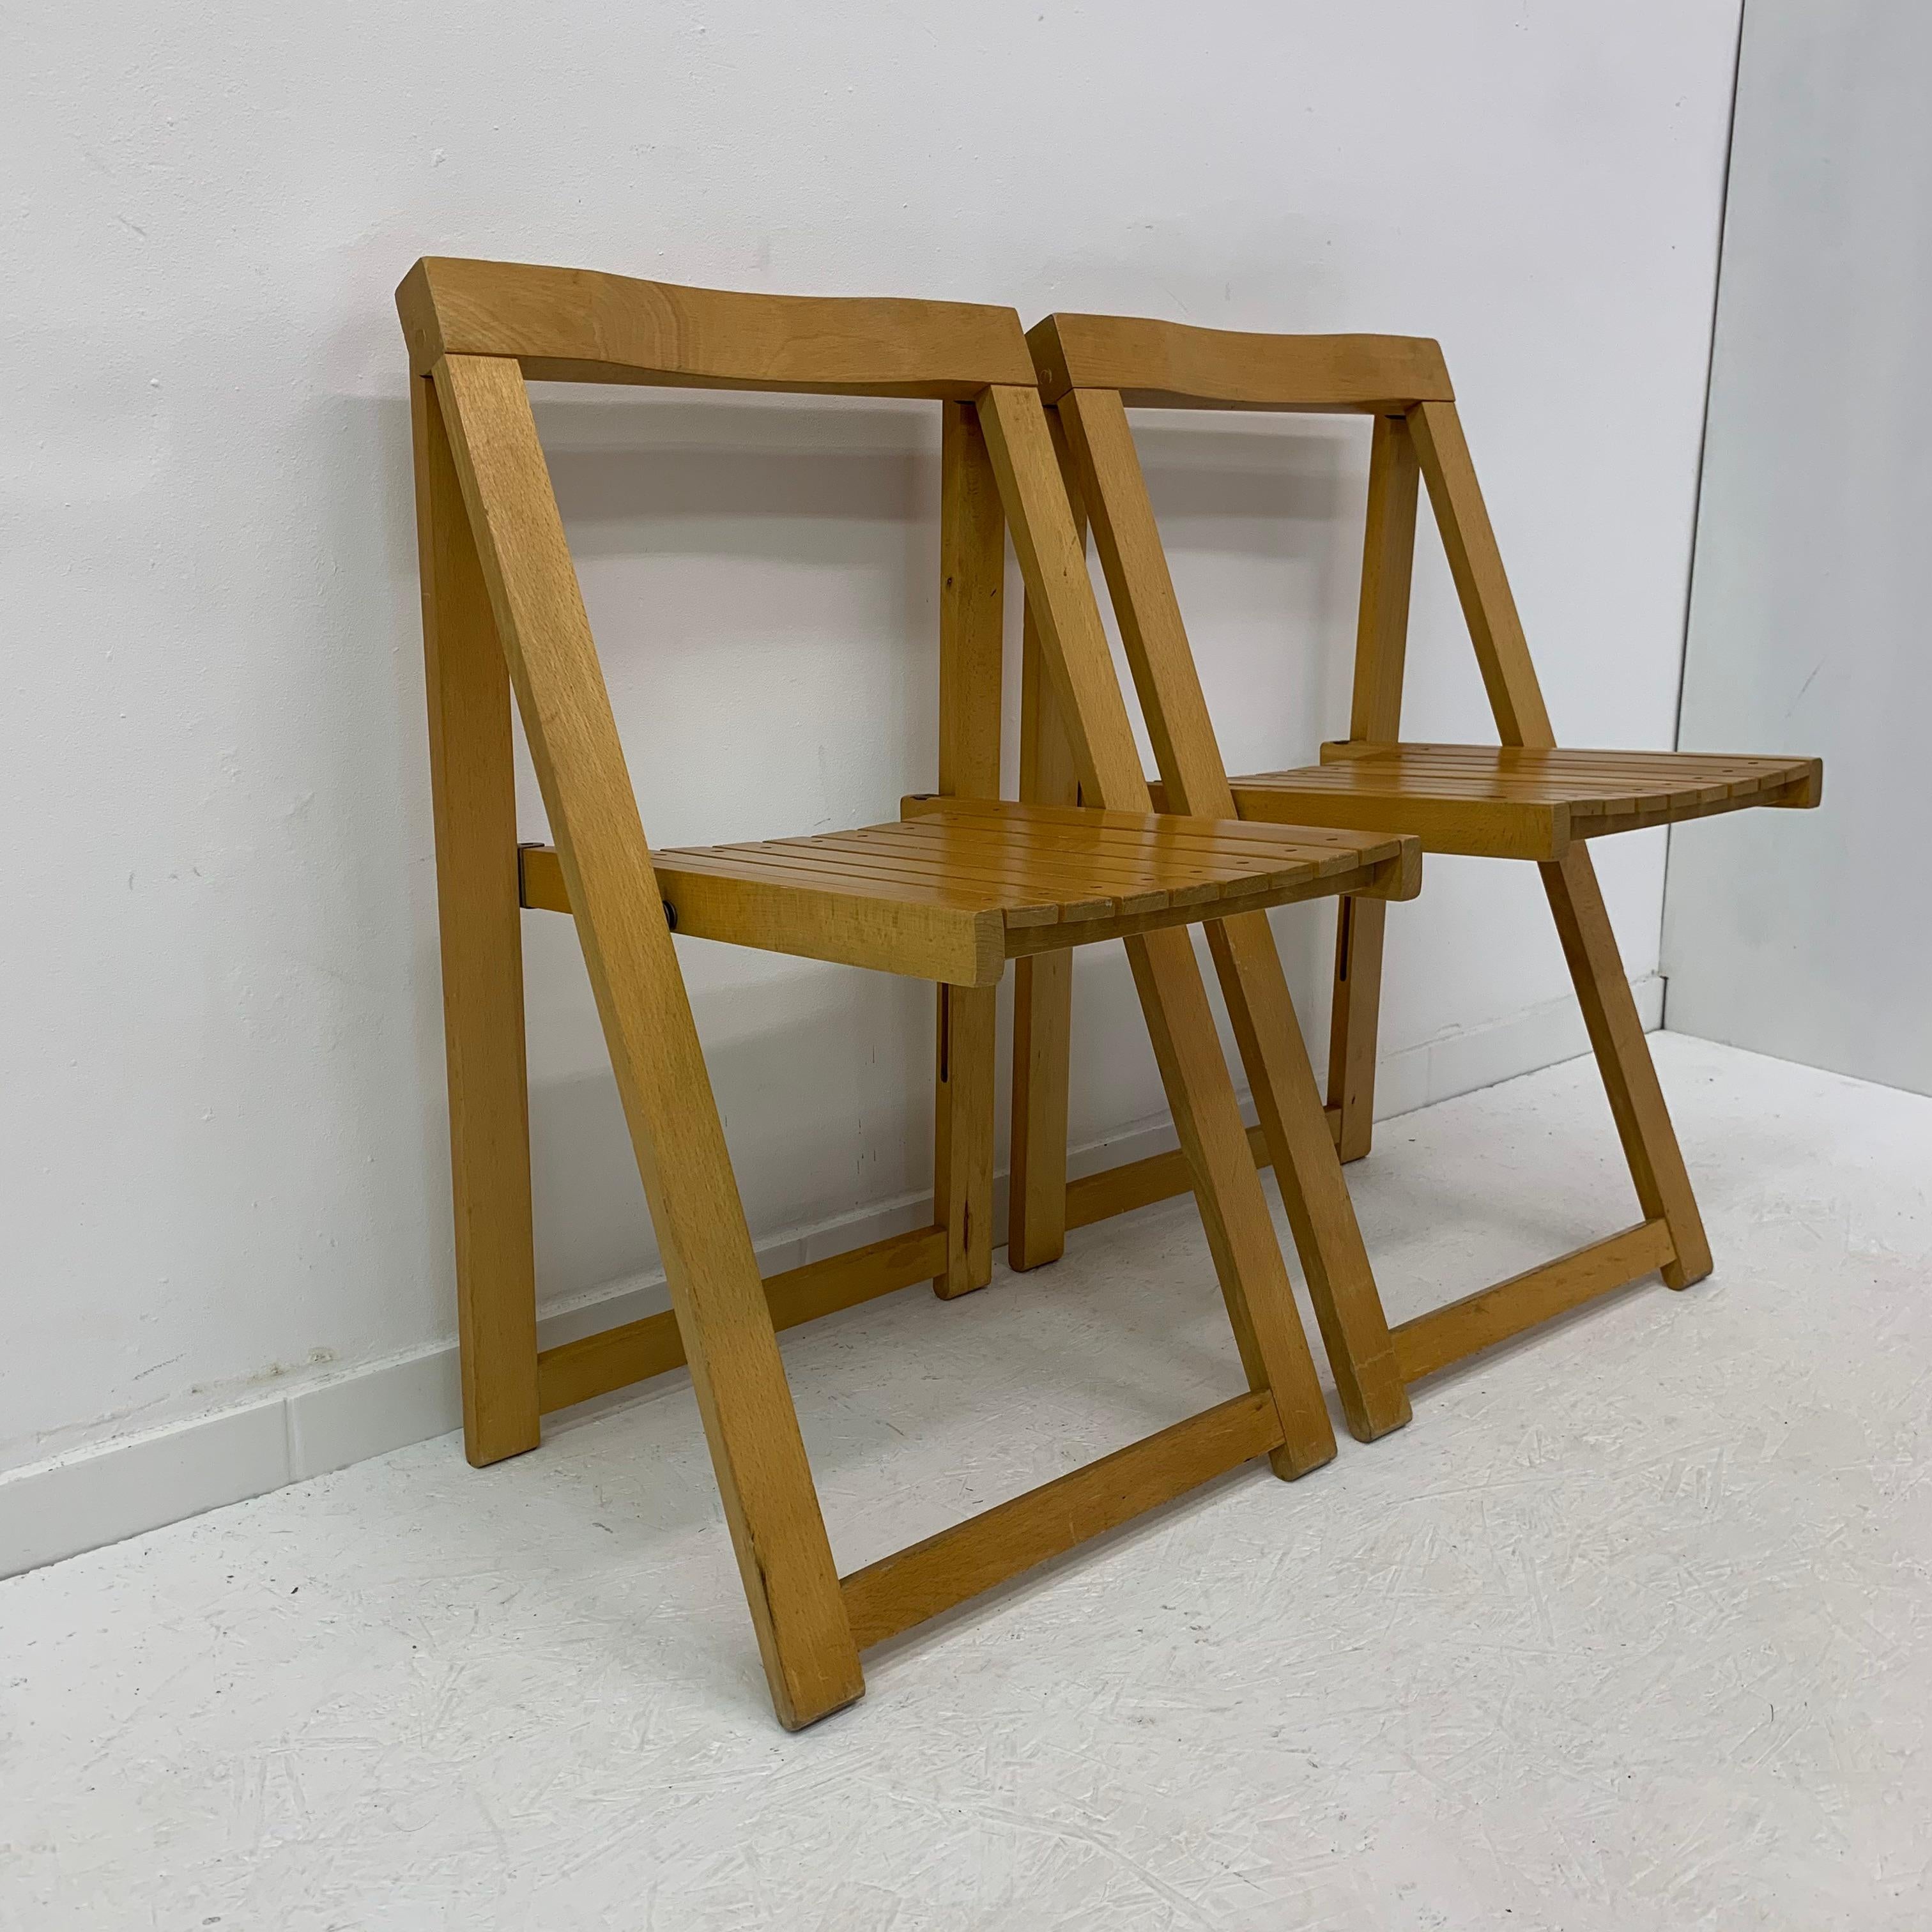 Mid-20th Century Set of 2 Aldo Jacober for Alberto Bazzani folding chairs, 1960’s For Sale